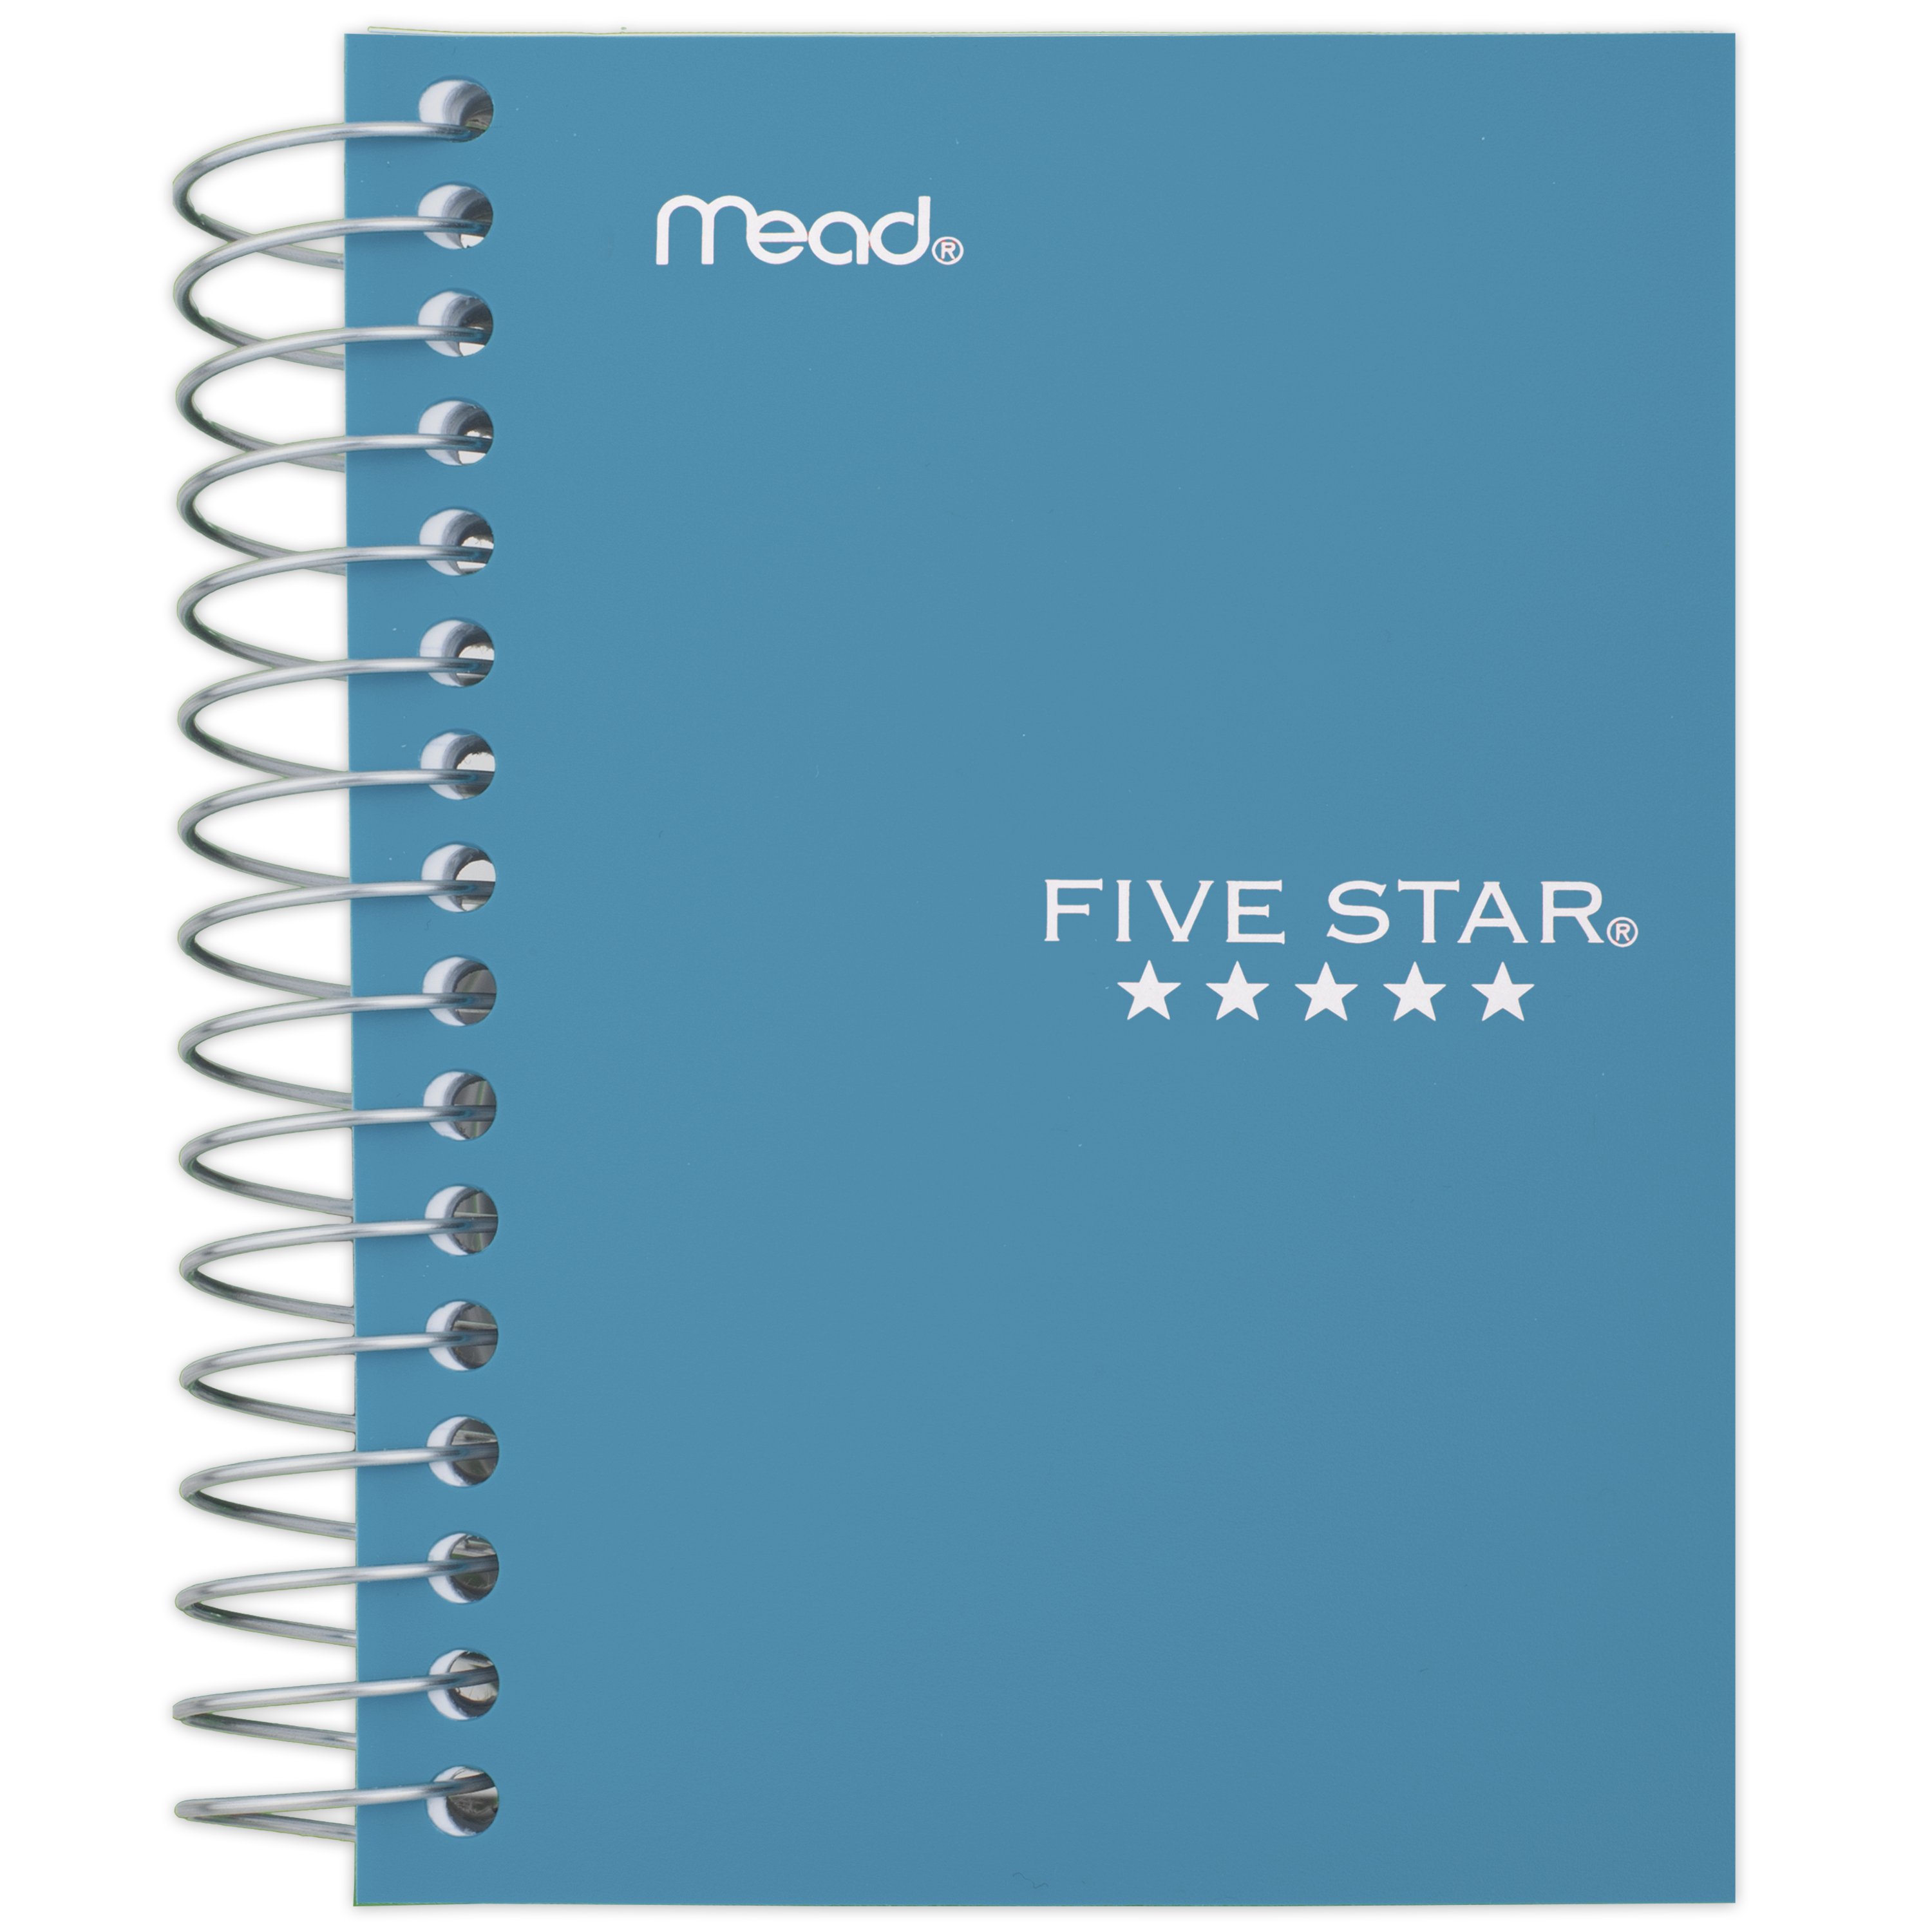 Five Star Fat Lil' Spiral Notebook, College Ruled, Tidewater (450021CG1-WMT) - image 1 of 9